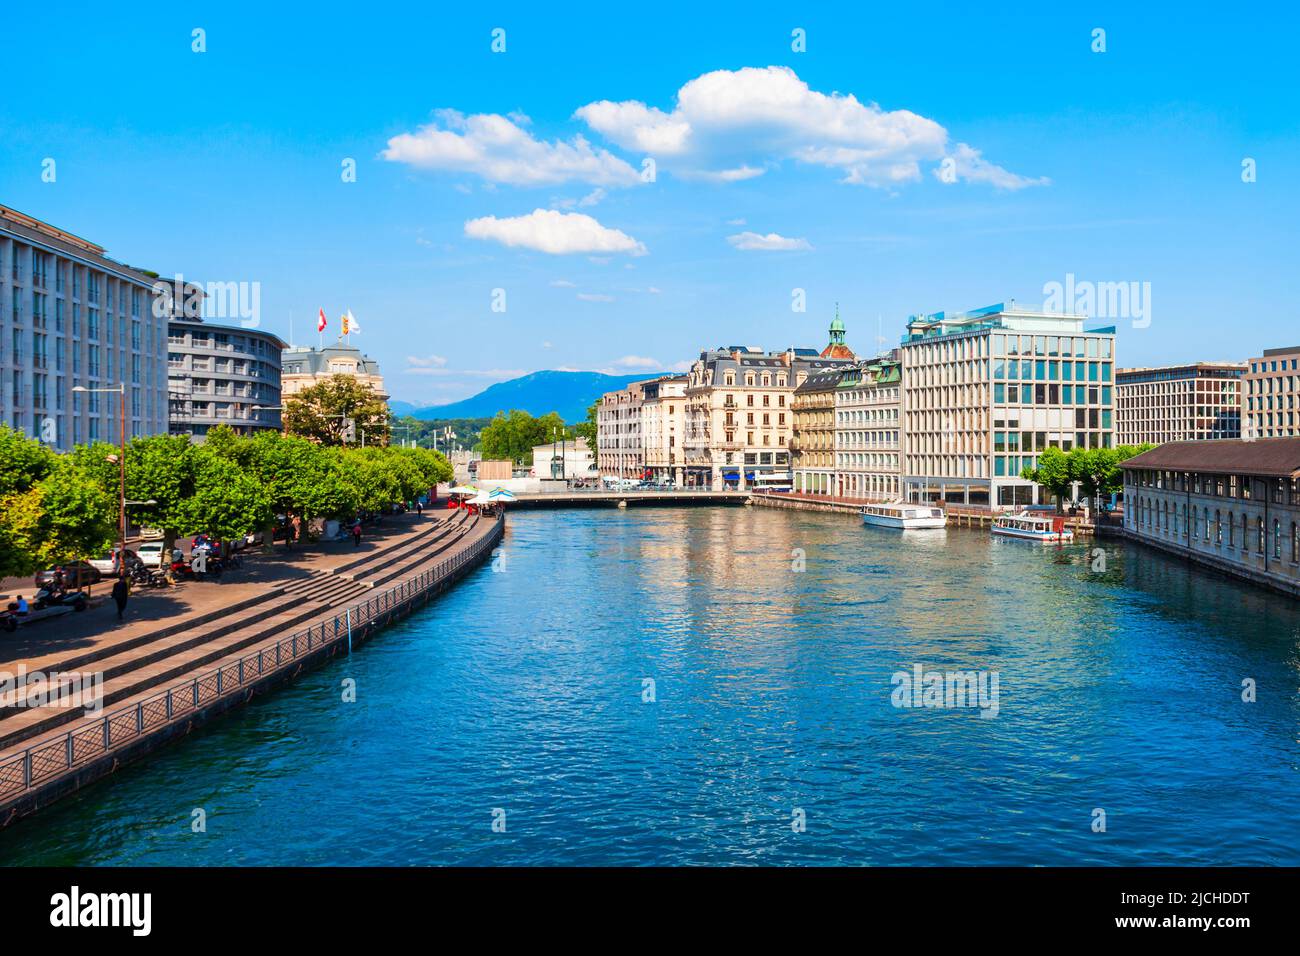 Geneva city centre aerial panoramic view. Geneva or Geneve is the second most populous city in Switzerland, located on Lake Geneva. Stock Photo